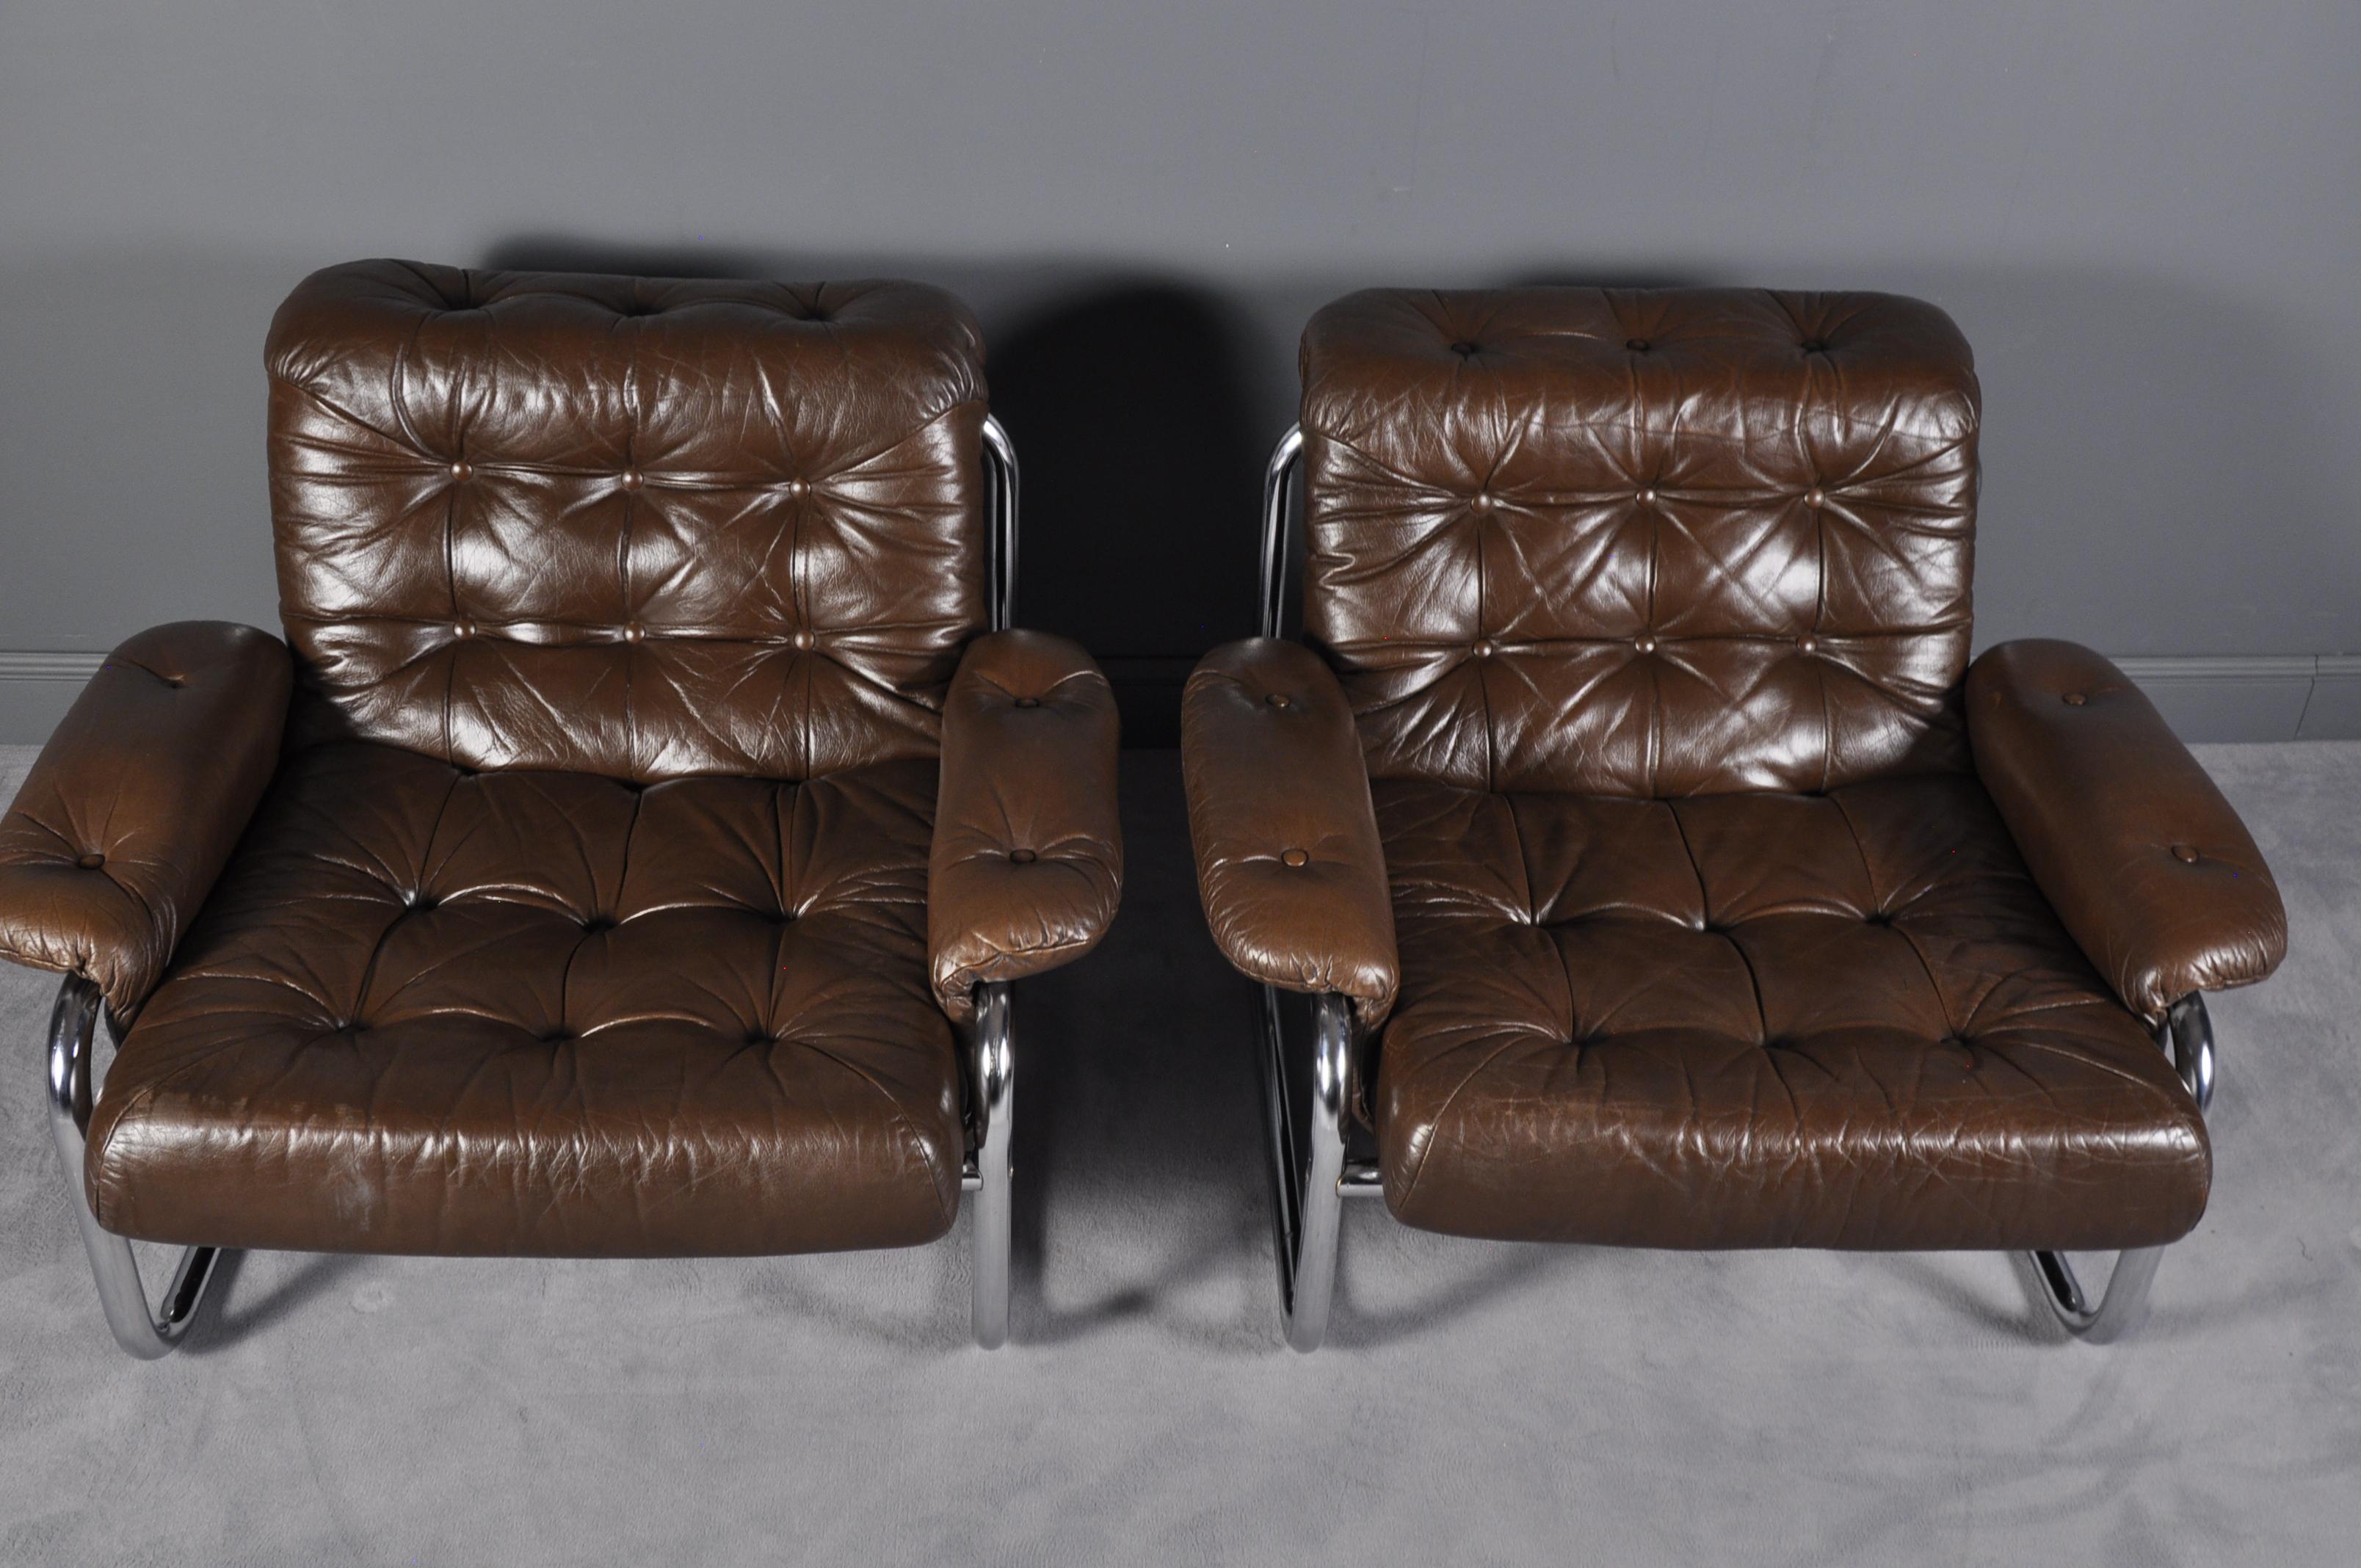 Swedish Pair of Johan Bertil Häggström for Ikea Leather Lounge Chairs, Sweden, 1970s